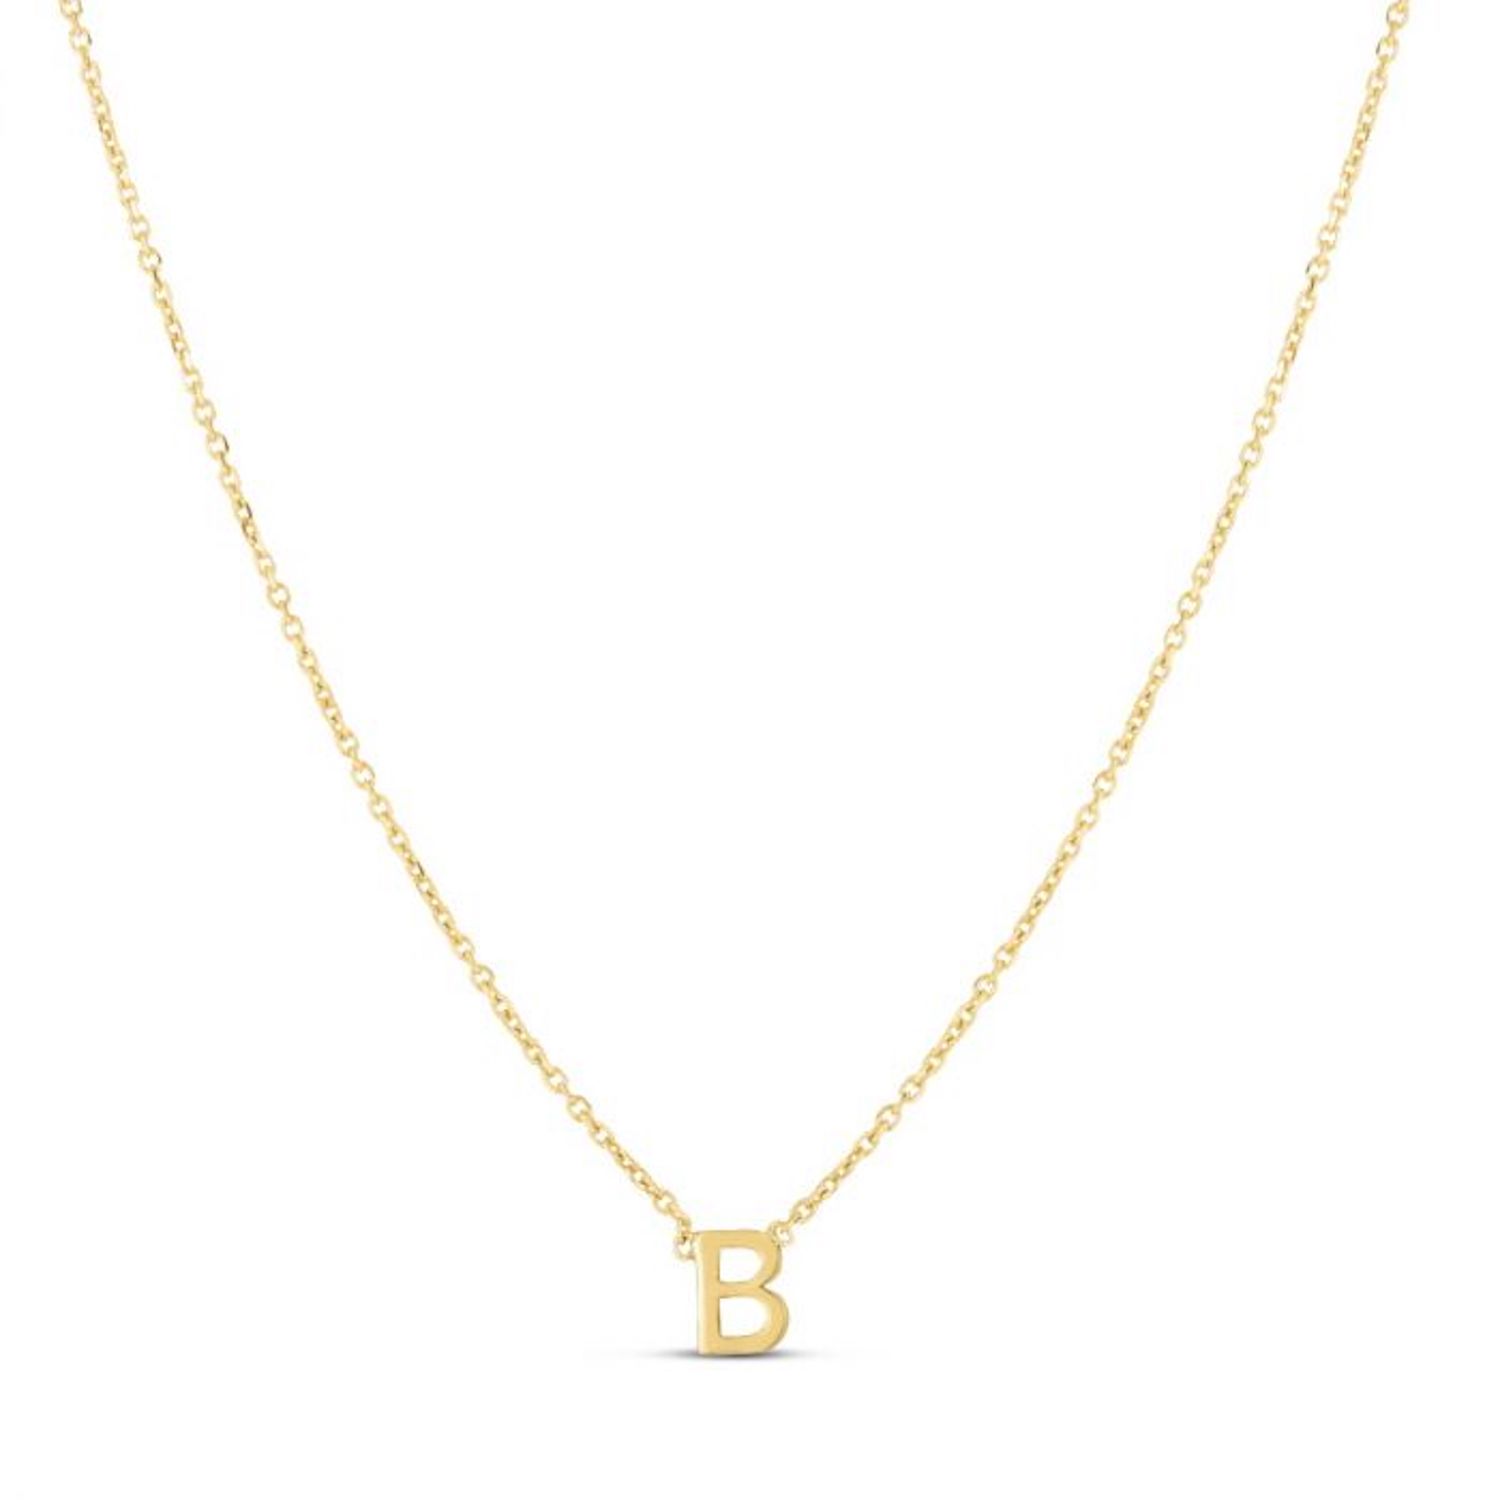 14K Yellow Gold Letter Initials Pendant Necklace 16"-18" - B